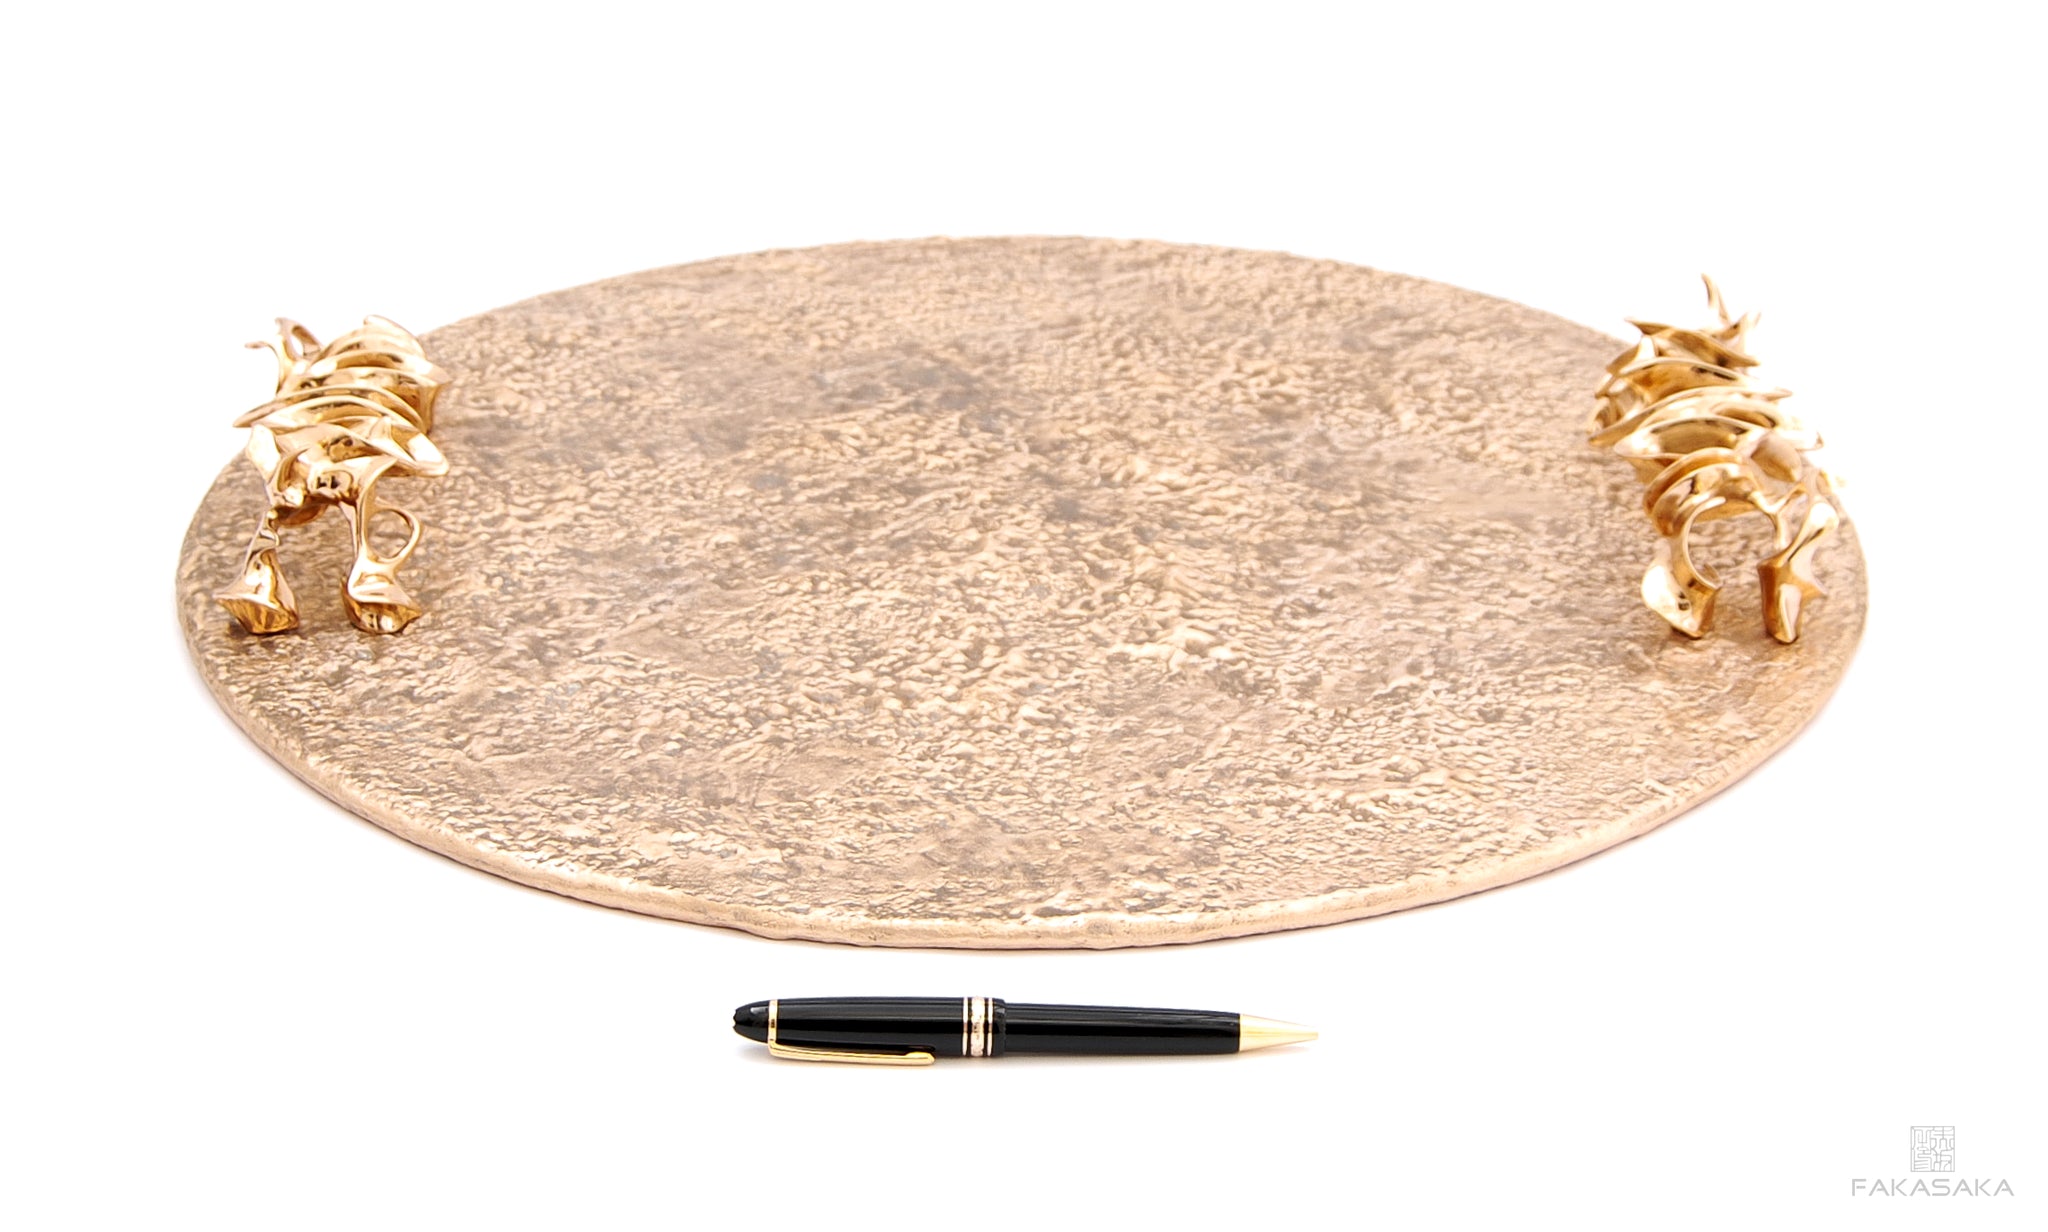 AVA<br><br>BAR TRAY / CENTERPIECE / CANDLE TRAY<br><br>POLISHED BRONZE